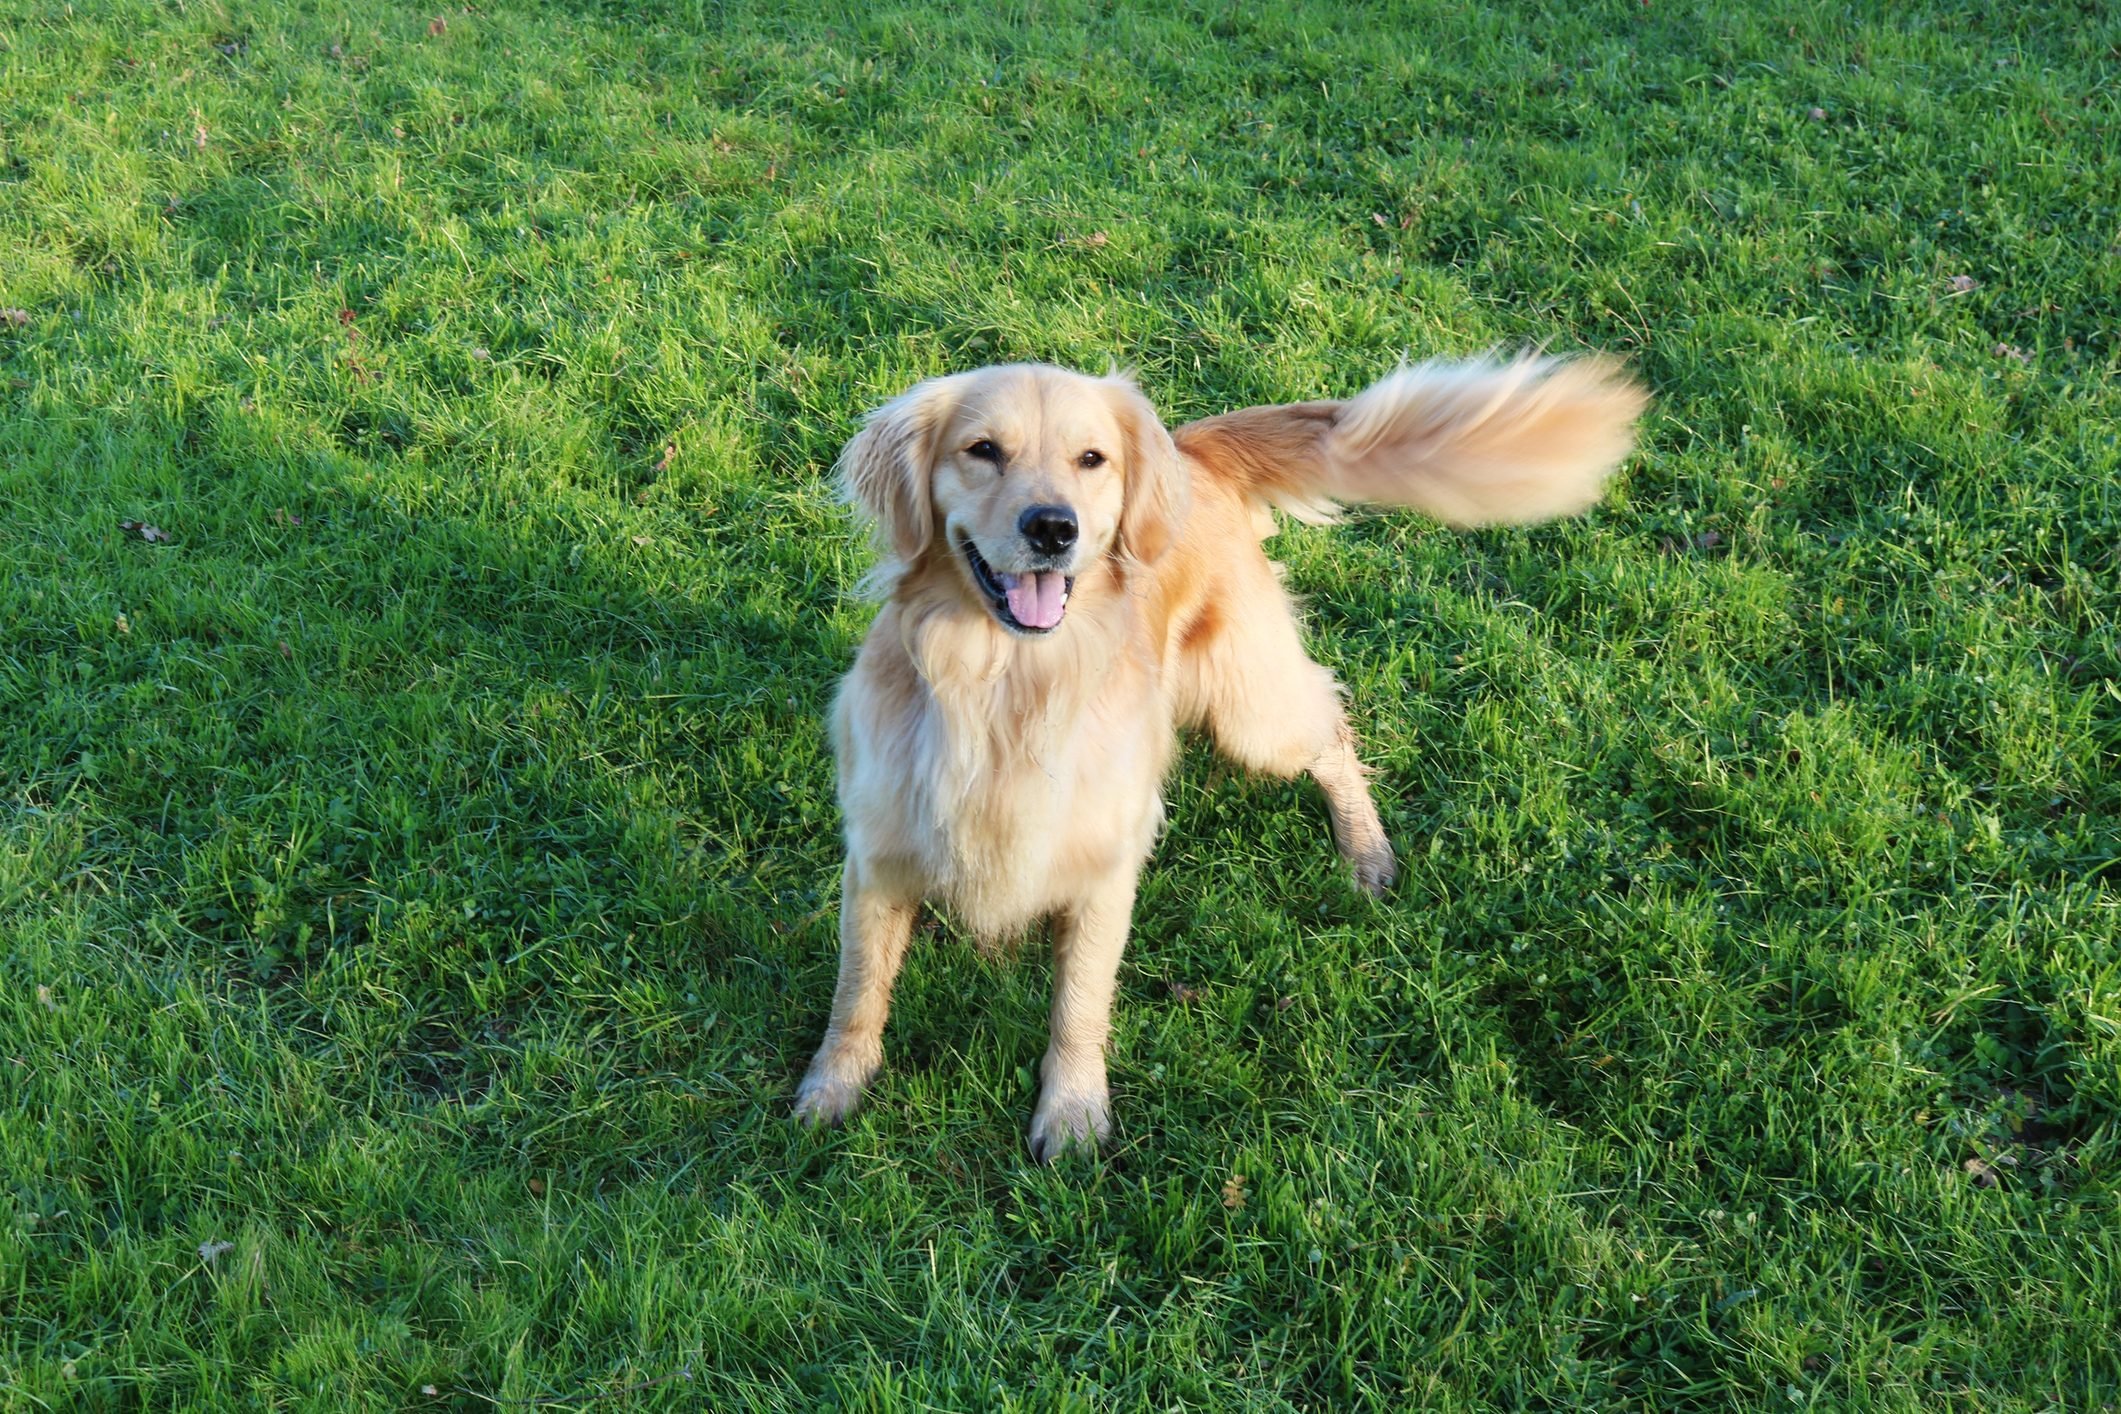 <p>How do you know if your dog is happy? Check the tail. A gentle, loose <a href="https://www.rd.com/list/secrets-dogs-tail-trying-to-tell-you/" rel="noopener noreferrer">tail wag</a> can indicate happiness in a dog. Dogs that are feeling happy may wag their tail slowly and widely from side to side, with their tail in a neutral position or slightly raised. In contrast, a dog that's feeling aggressive will wag their tail quickly, with their tail arched over their back. An anxious dog will wag their tail to the left.</p> <p>But just make sure to observe your dog's tail wag in context with other emotional cues, such as posture, gait and facial expression. "Using a wagging tail as a sole indicator of a dog's emotional state can be tricky," cautions Bekoff. For example, if your dog's tail wag suggests aggression and your dog is baring their teeth, your dog is feeling aggressive rather than happy. On the other hand, if your dog has a loose, gentle and slow tail wag and has a happy-looking facial expression (soft gaze, relaxed mouth), your dog is probably feeling pretty happy. Looking at these cues together "is a more reliable indicator of what a dog is feeling," he says.</p>